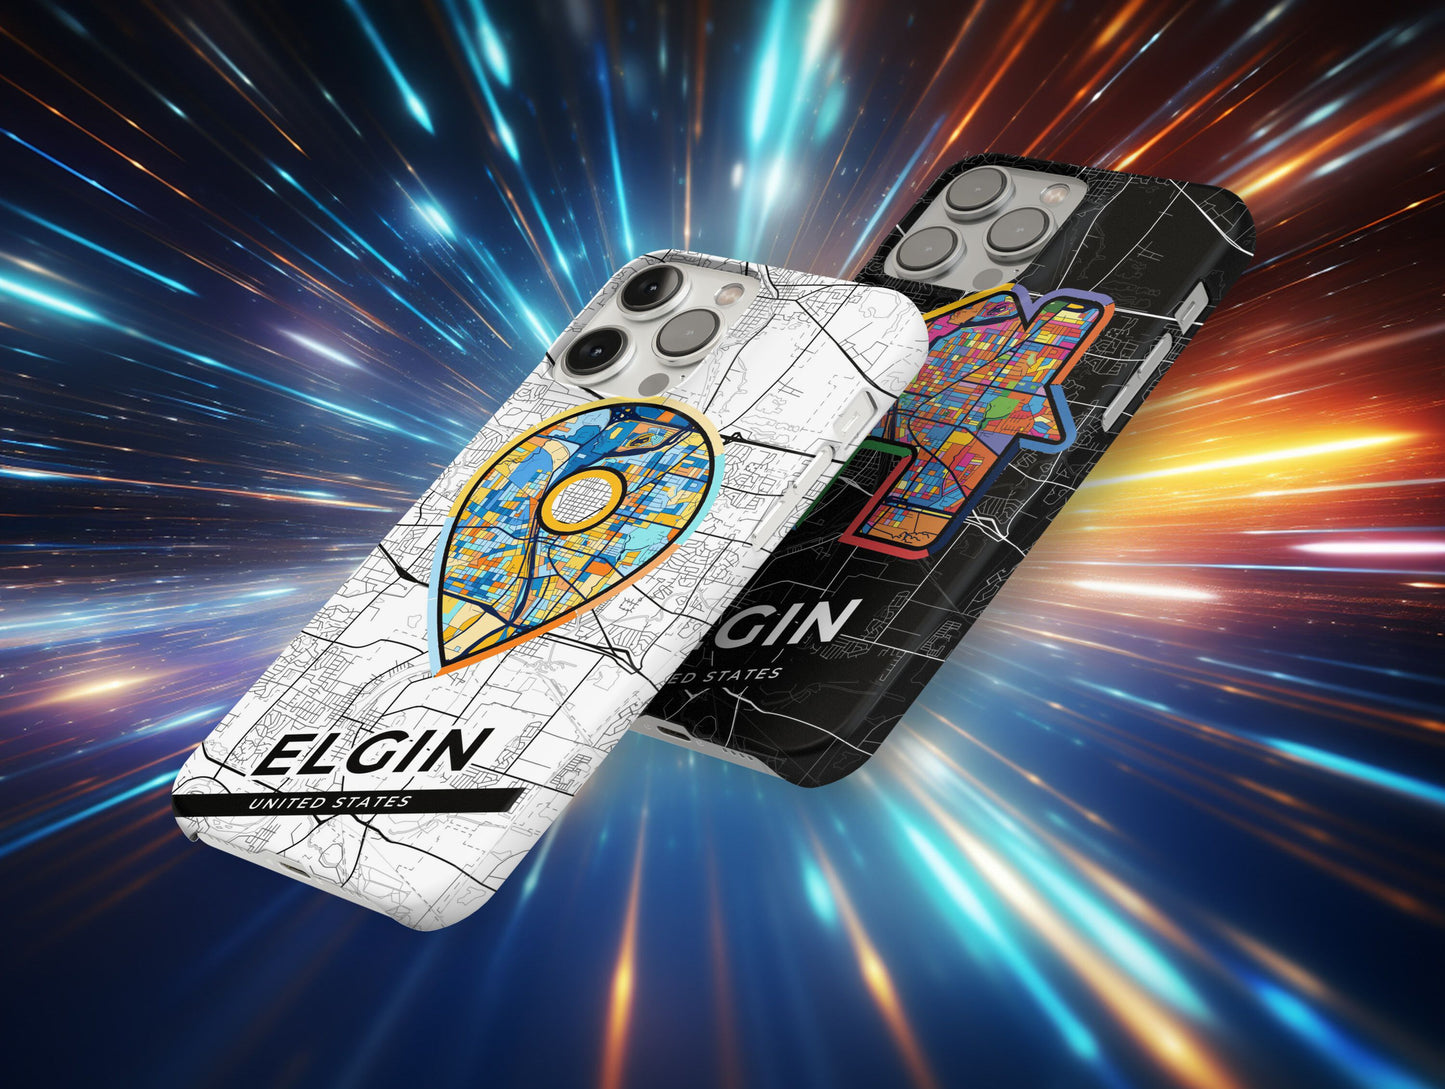 Elgin Illinois slim phone case with colorful icon. Birthday, wedding or housewarming gift. Couple match cases.